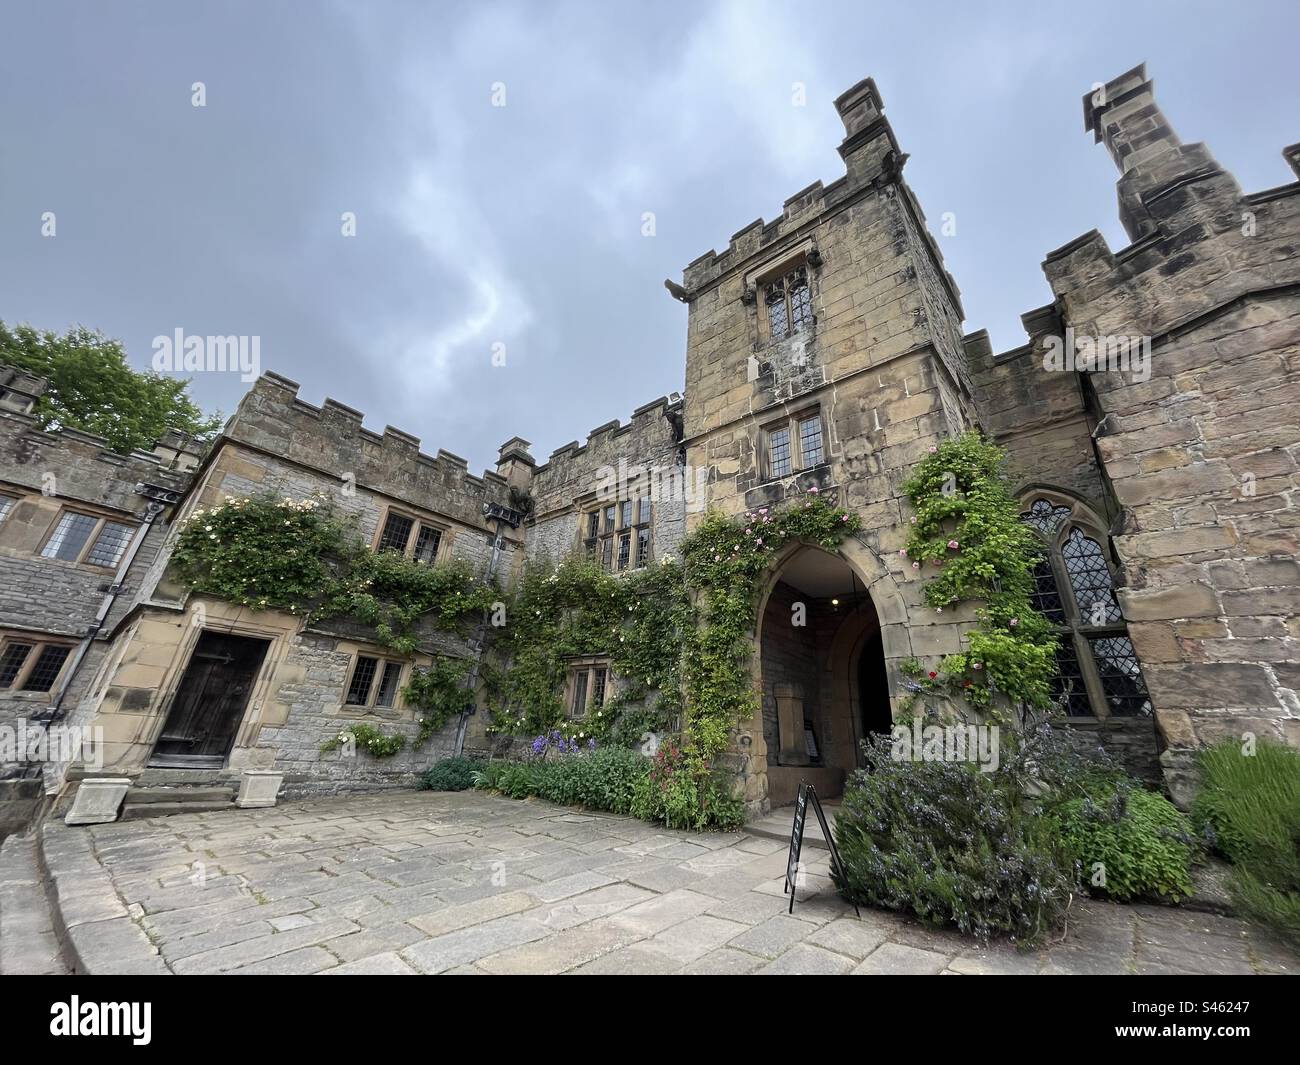 An old stately home in Great Britain Stock Photo